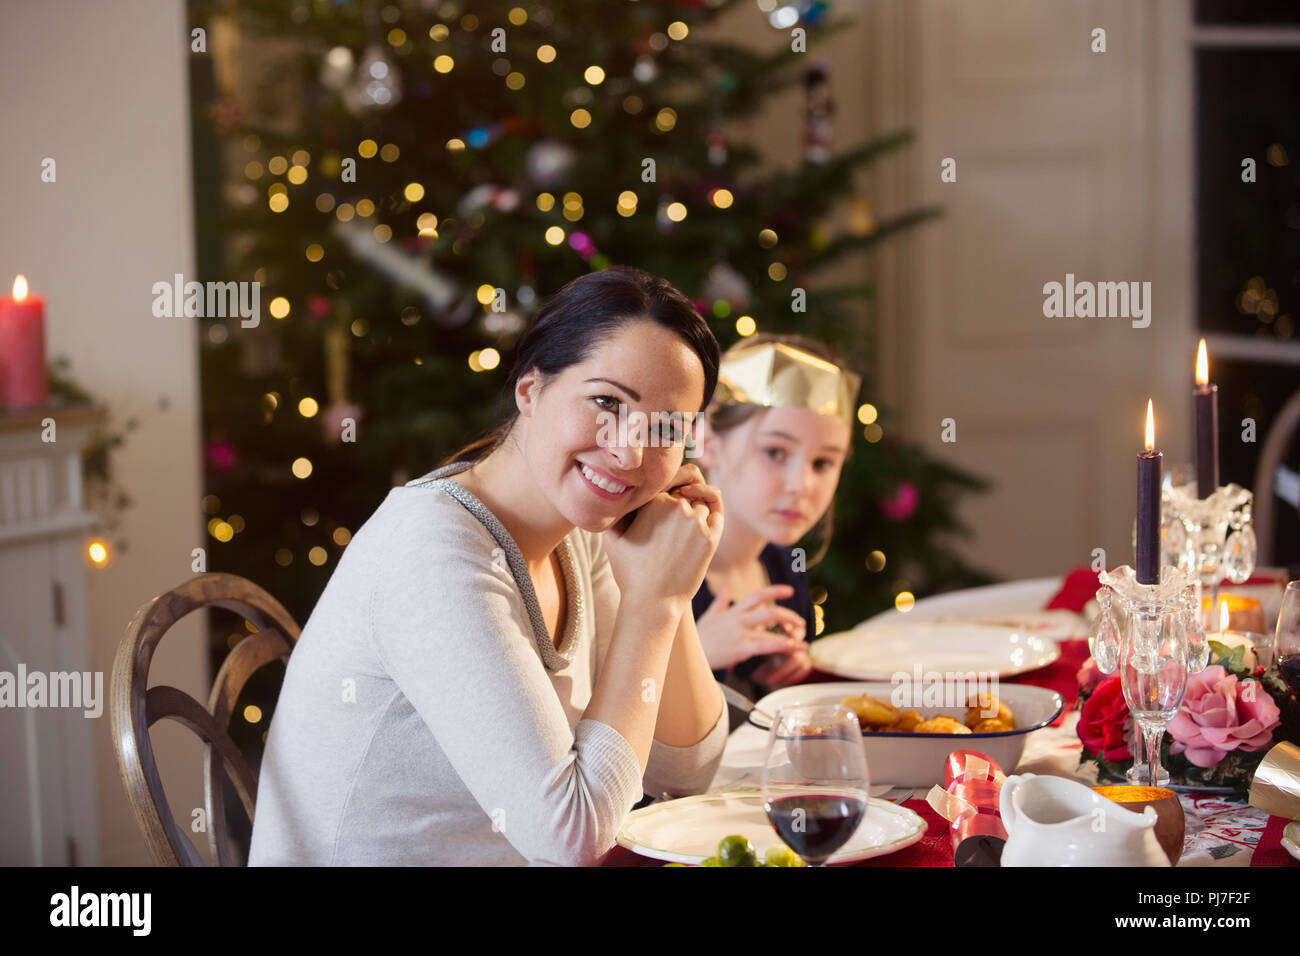 Portrait smiling mother and daughter enjoying candlelight Christmas dinner Stock Photo